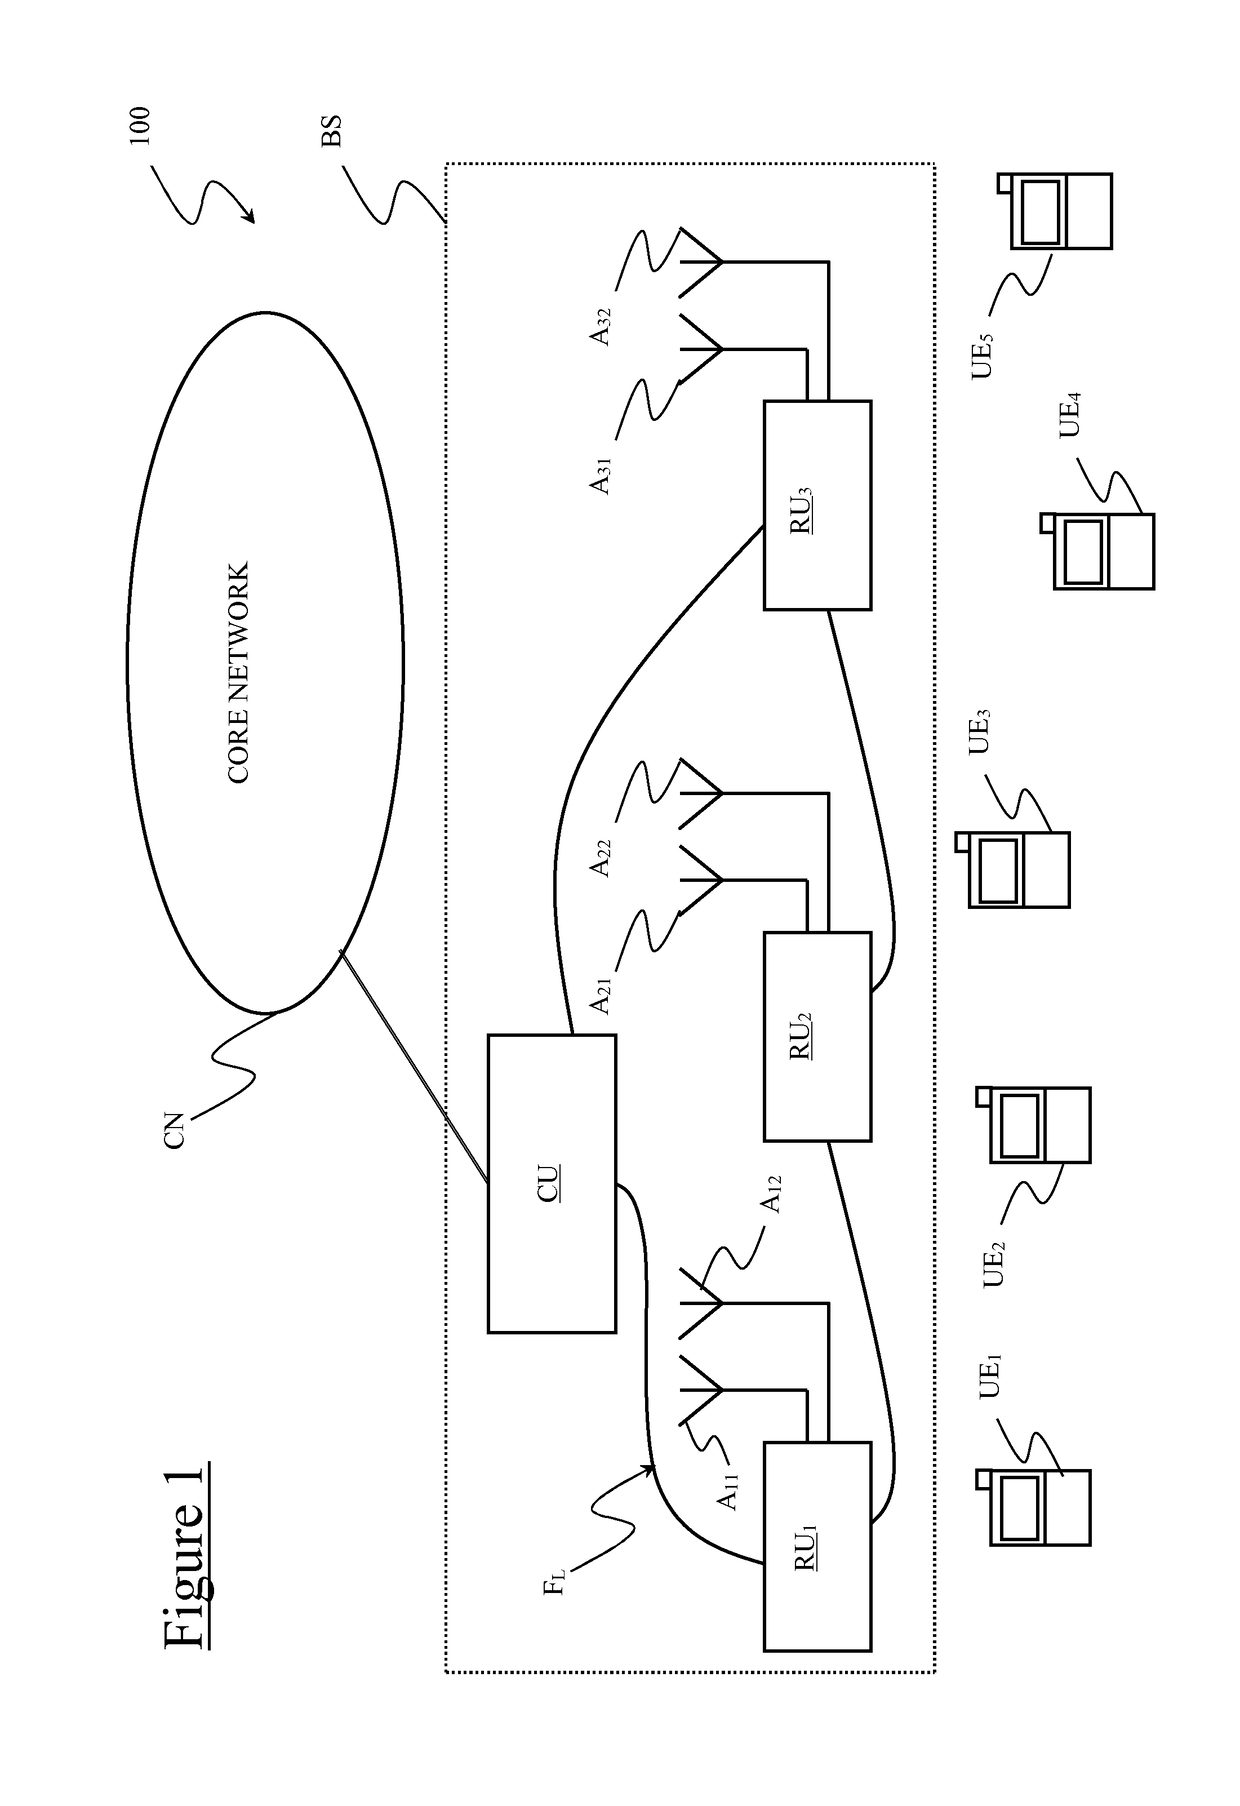 Method for reducing fronthaul load in centralized radio access networks (c-ran)